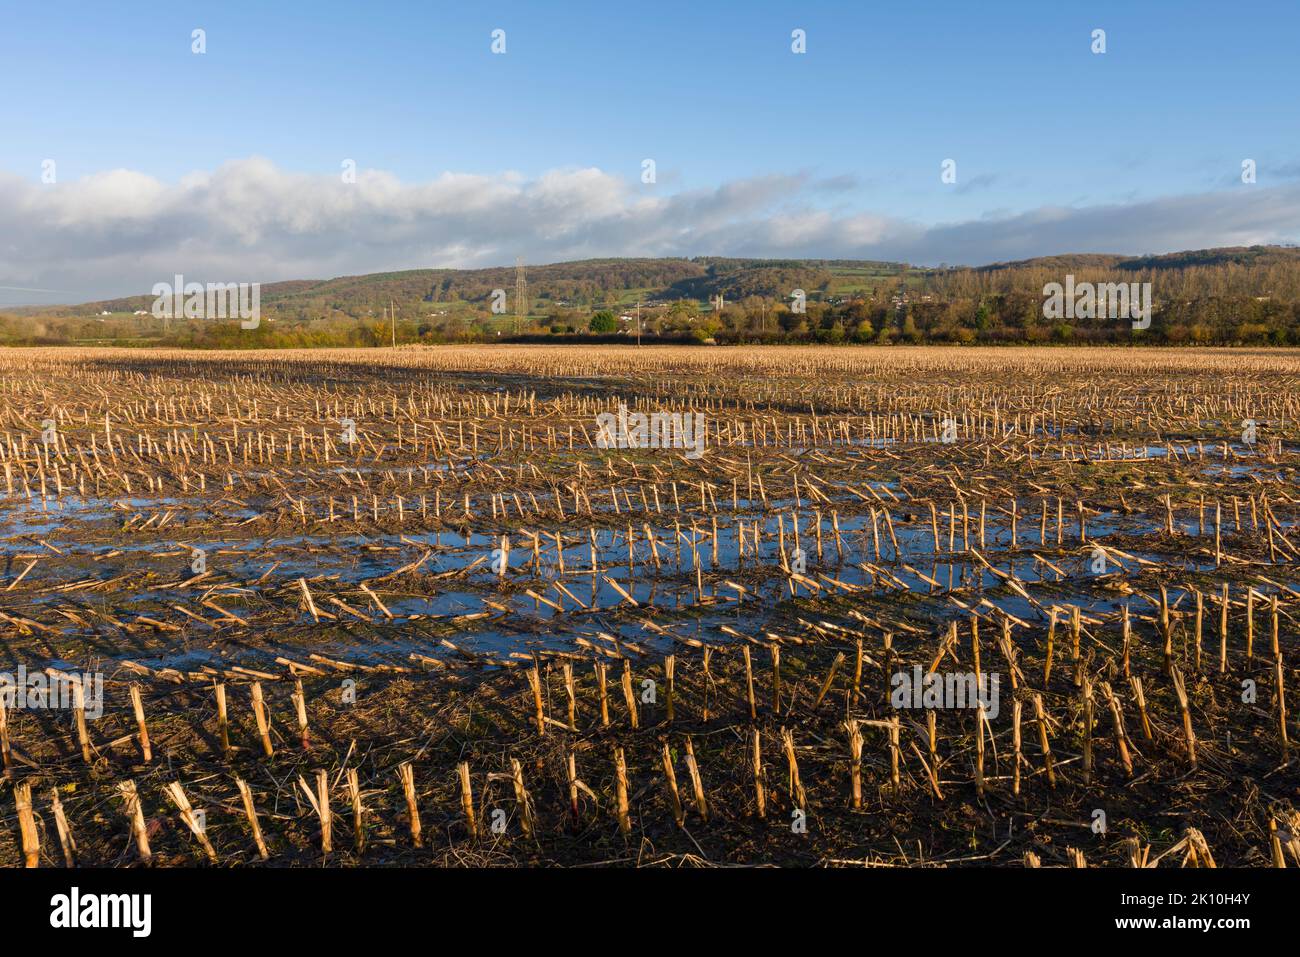 A waterlogged field with crop stubble left over from earlier harvesting in late autumn. Wrington, North Somerset, England. Stock Photo